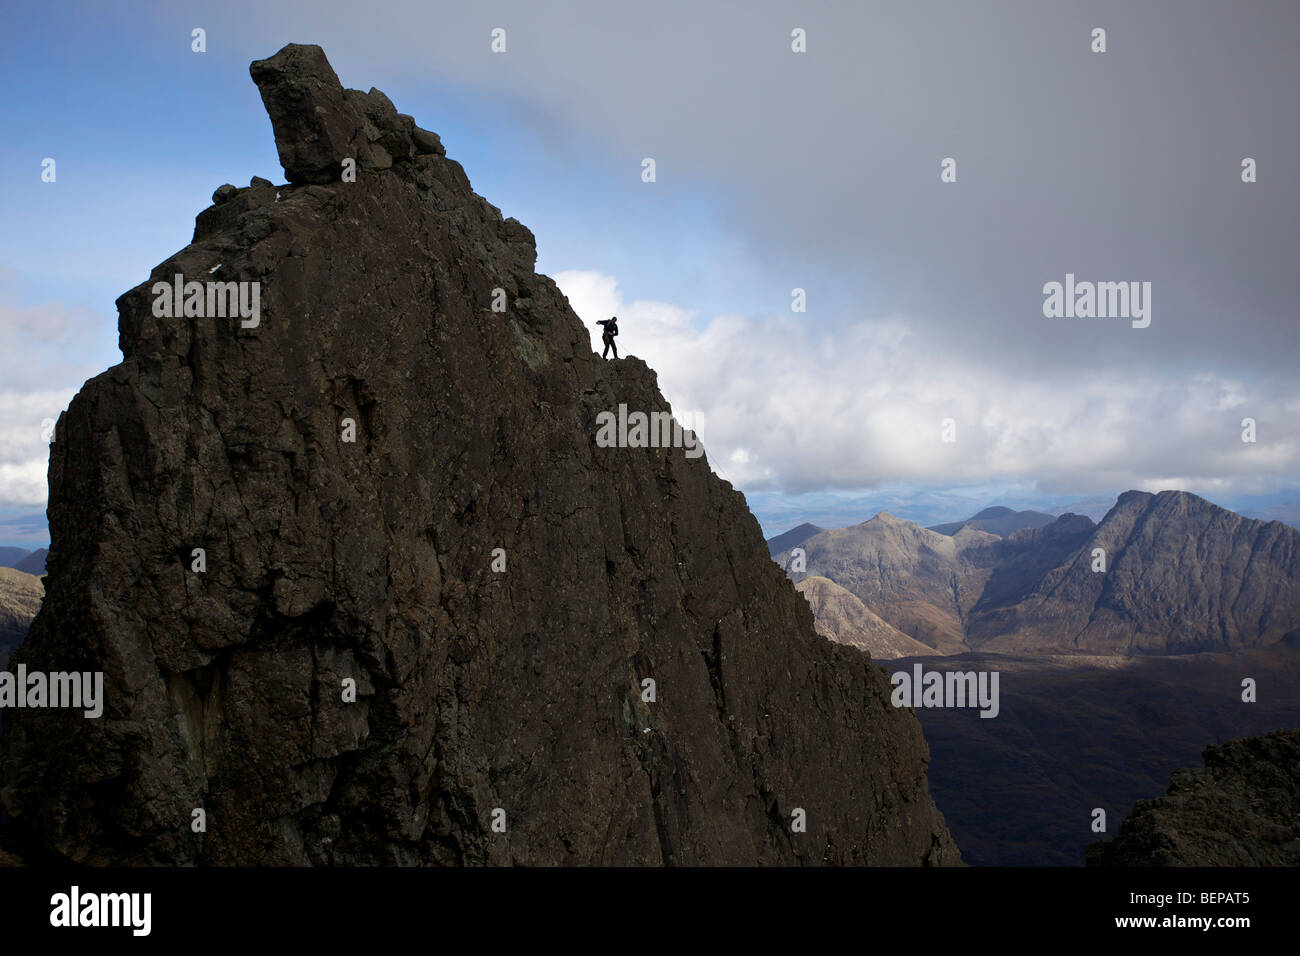 A climber on the Inaccessible Pinnacle, Isle of Skye, Scotland Stock Photo